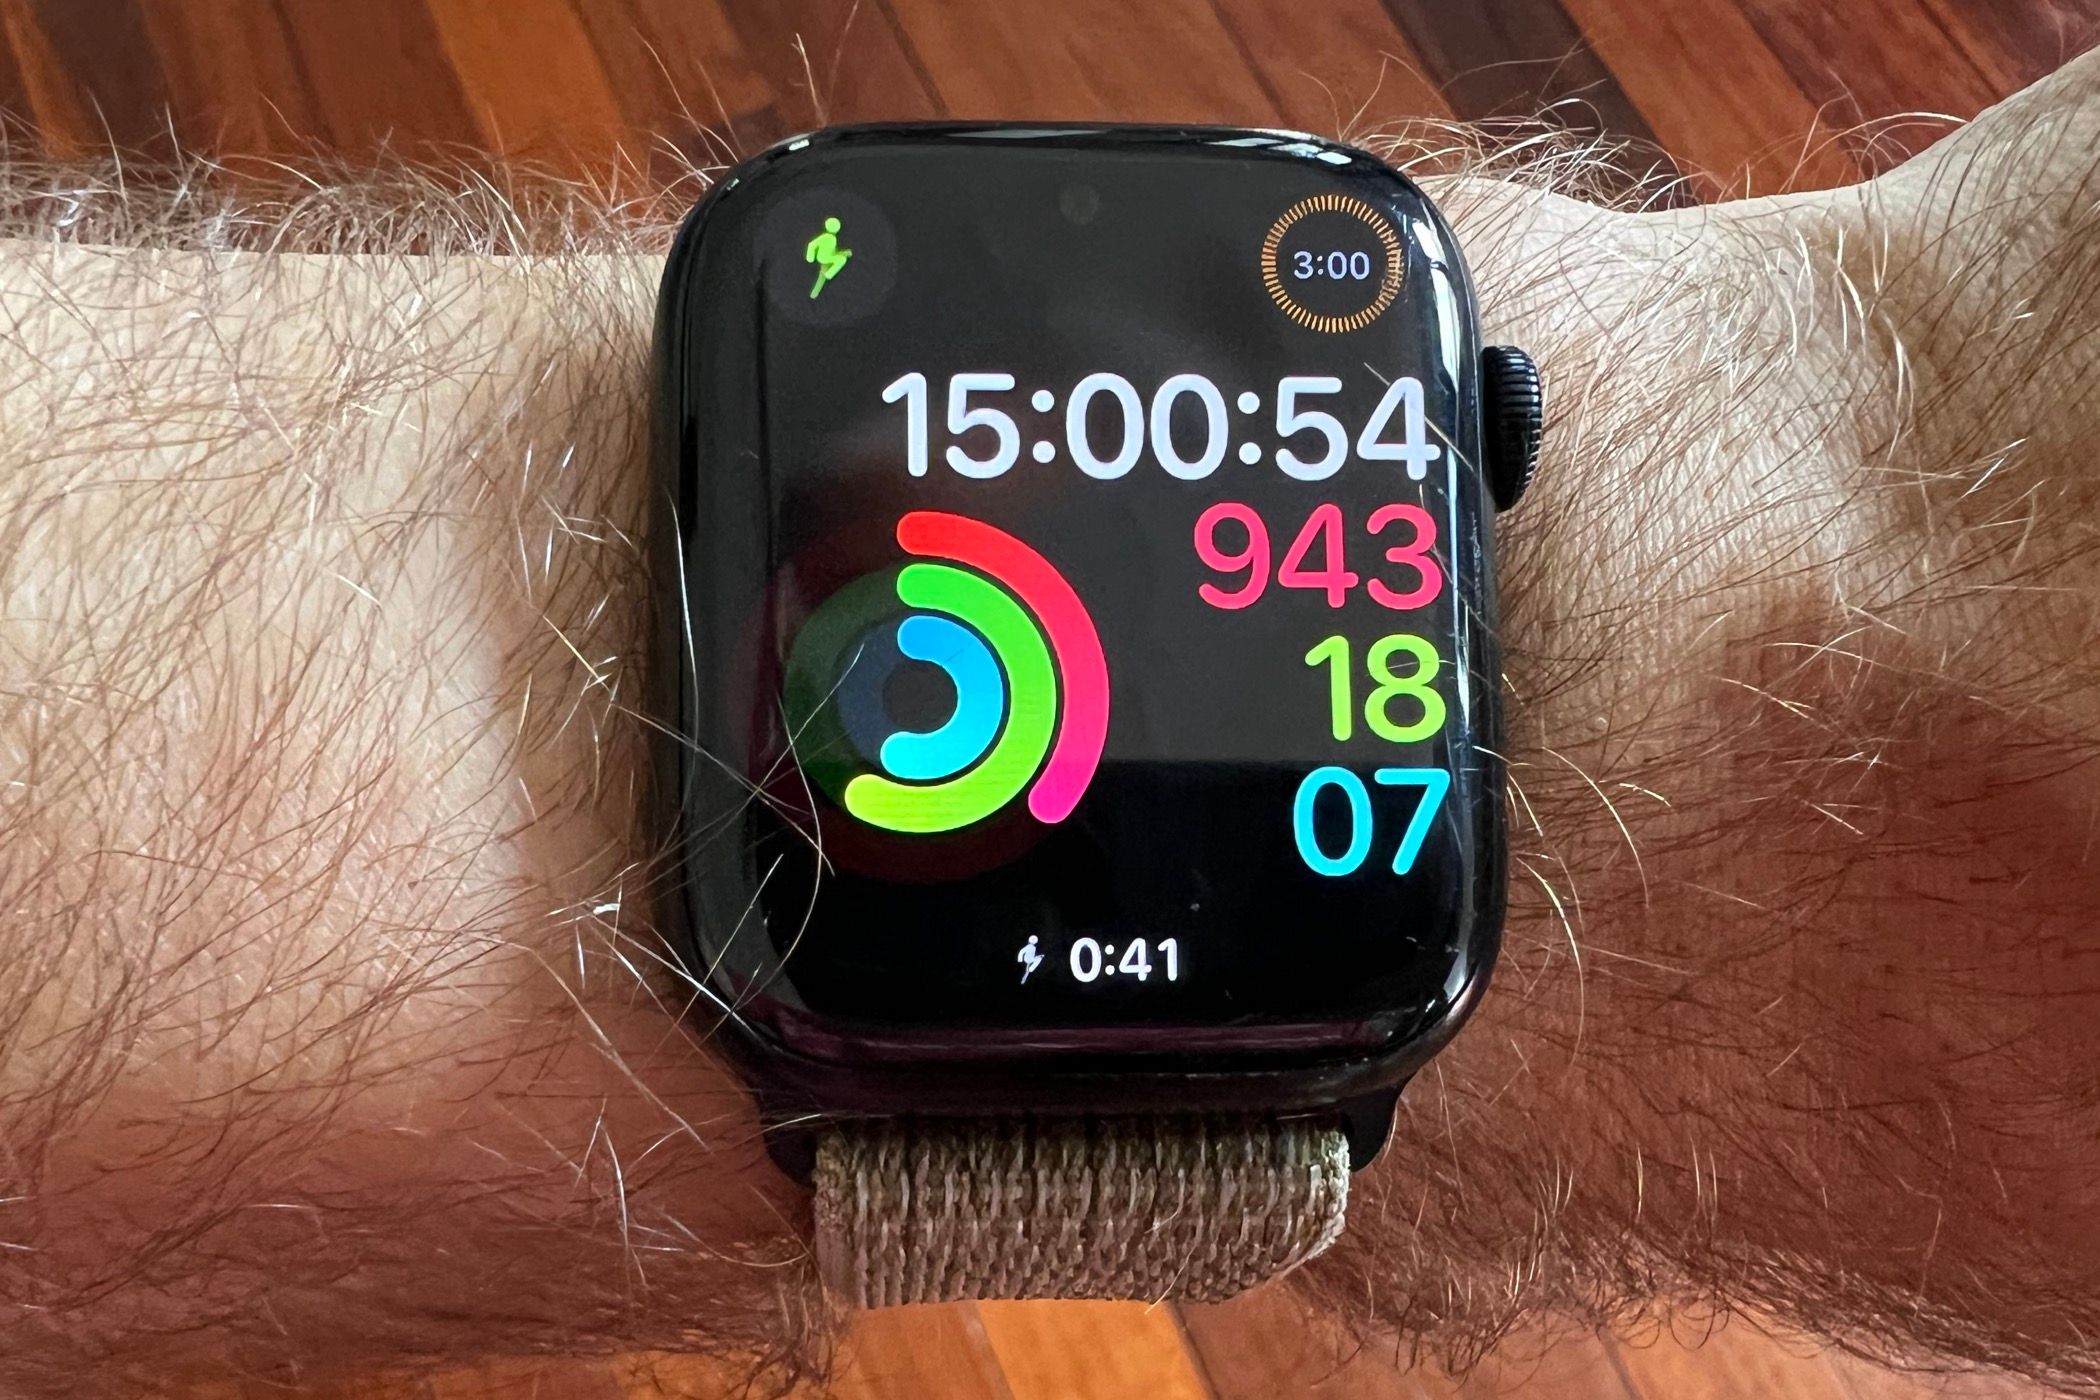 Apple Watch Series 8 showing the 'Activity' watch face.